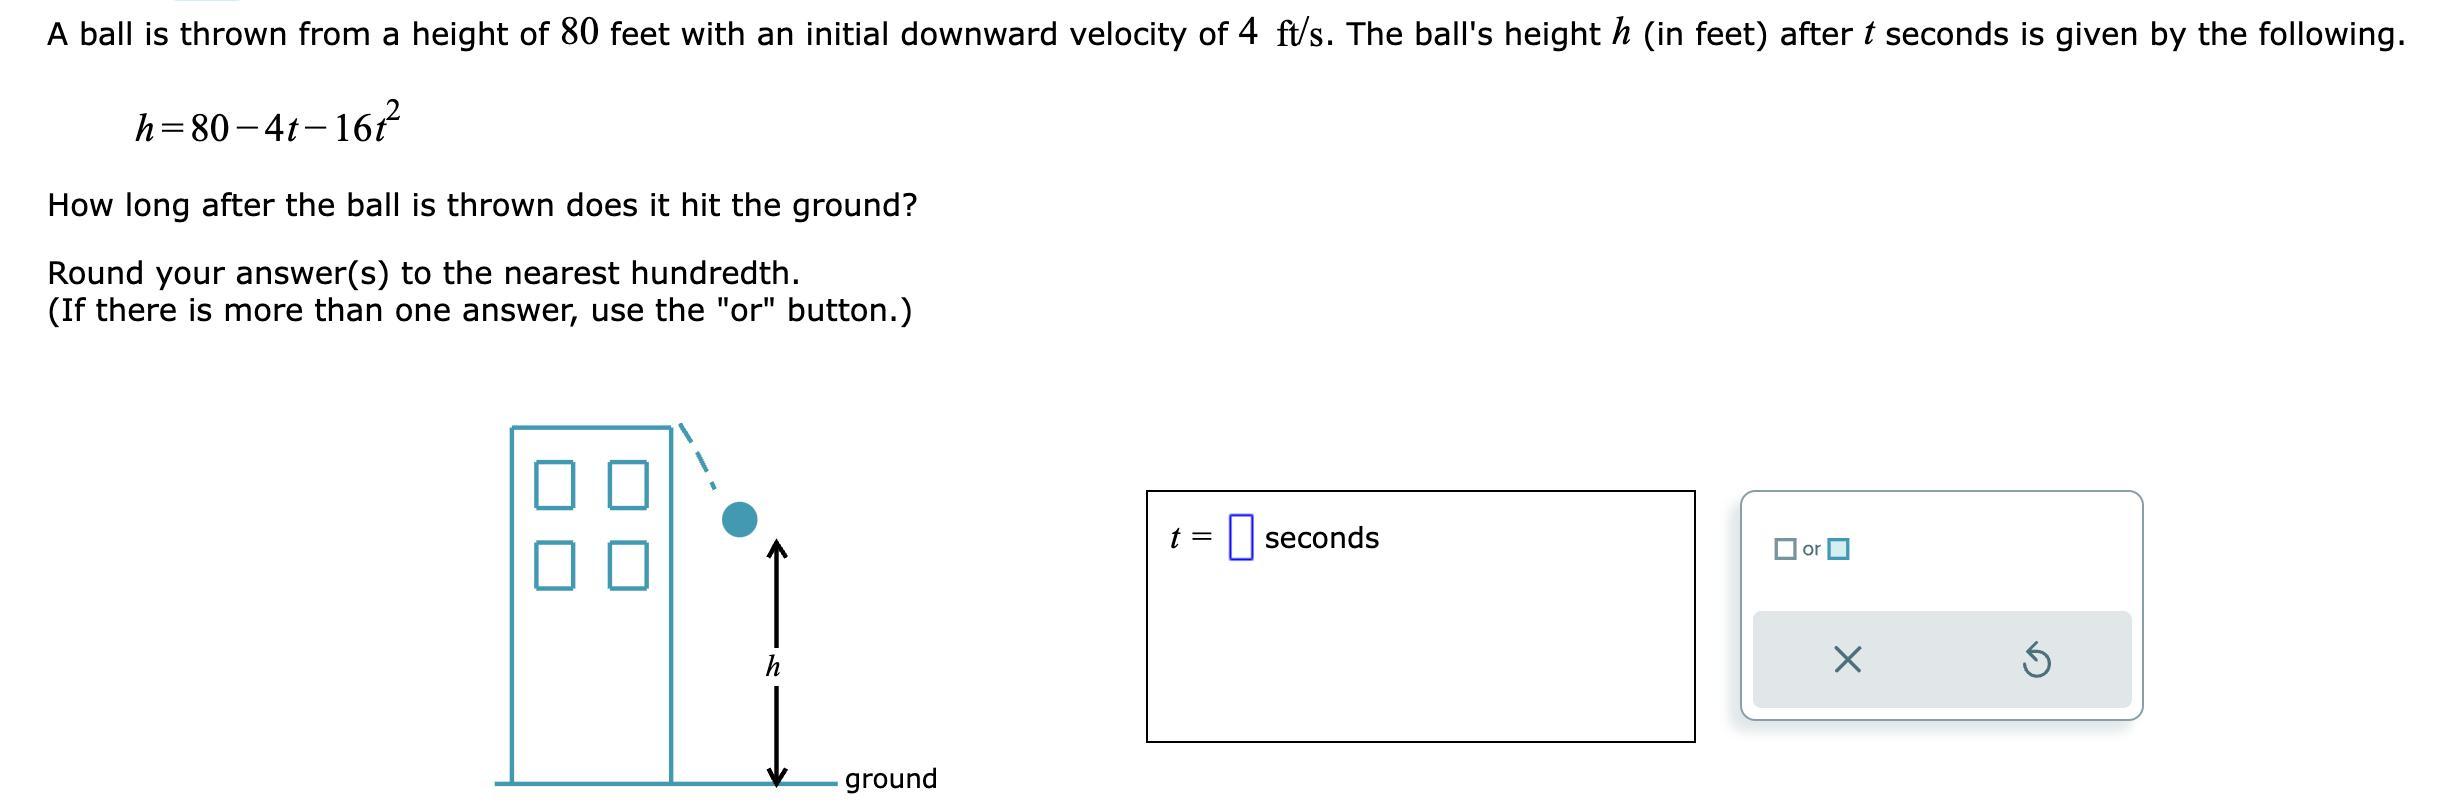 A ball is thrown from a height of 80 feet with an initial downward velocity of ( 4 mathrm{ft} / mathrm{s} ). The balls h